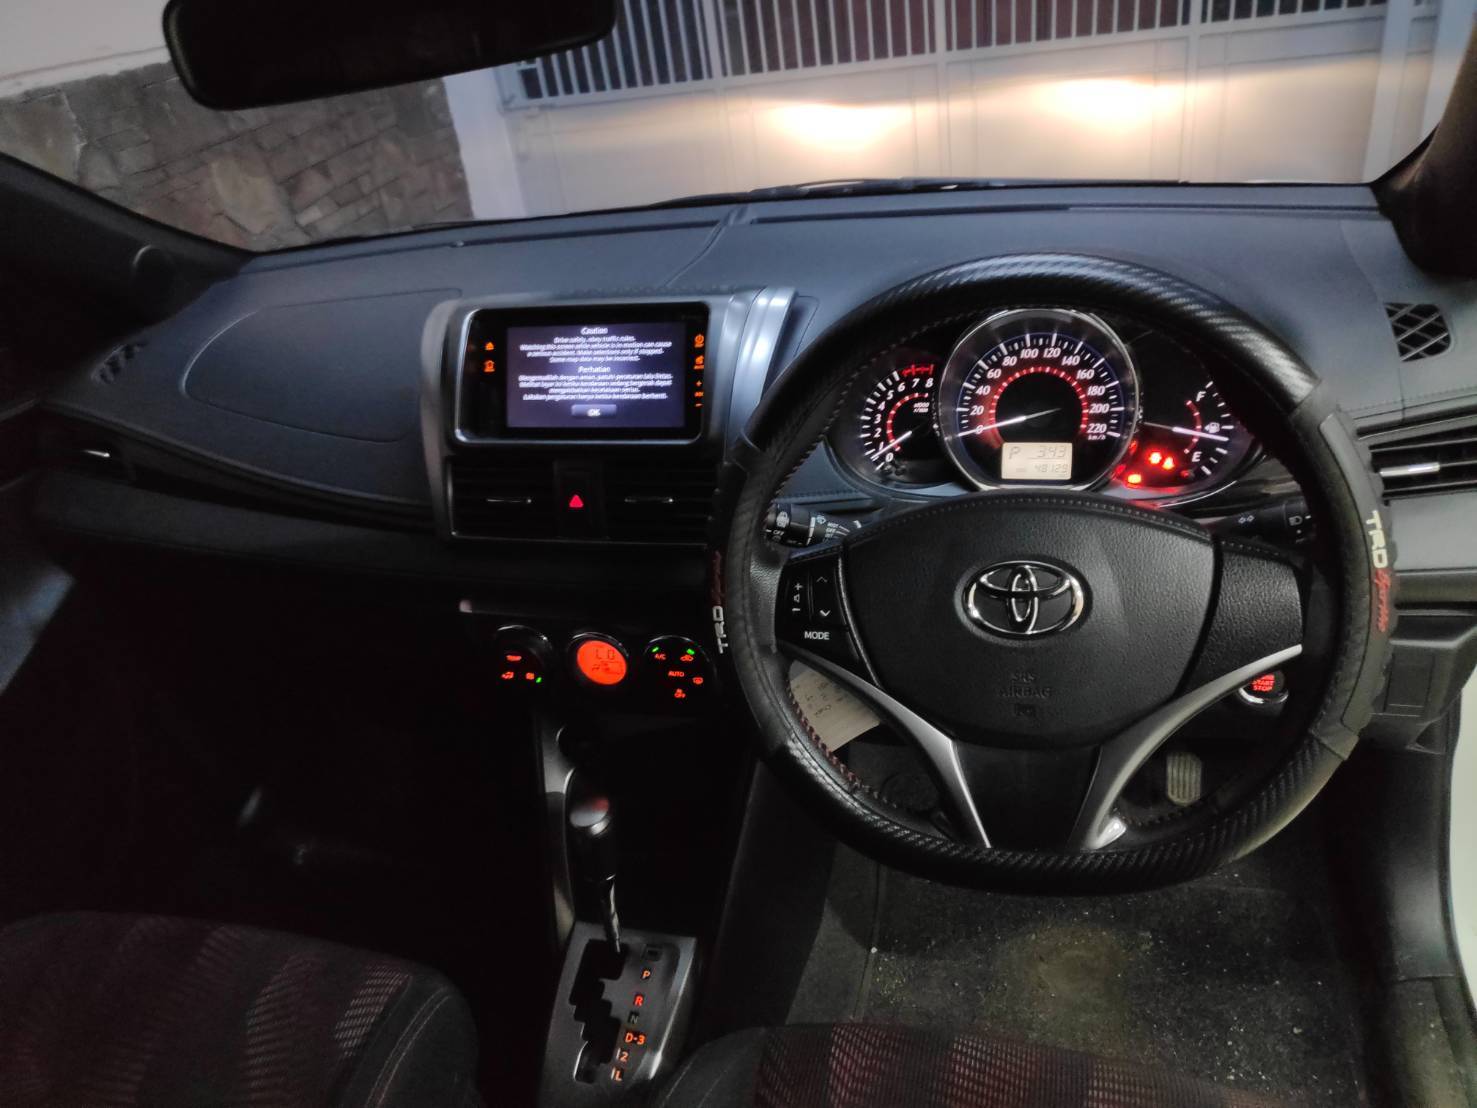 Used 2016 Toyota Yaris S TRD Sportivo 1.5L AT S TRD Sportivo 1.5L AT for sale